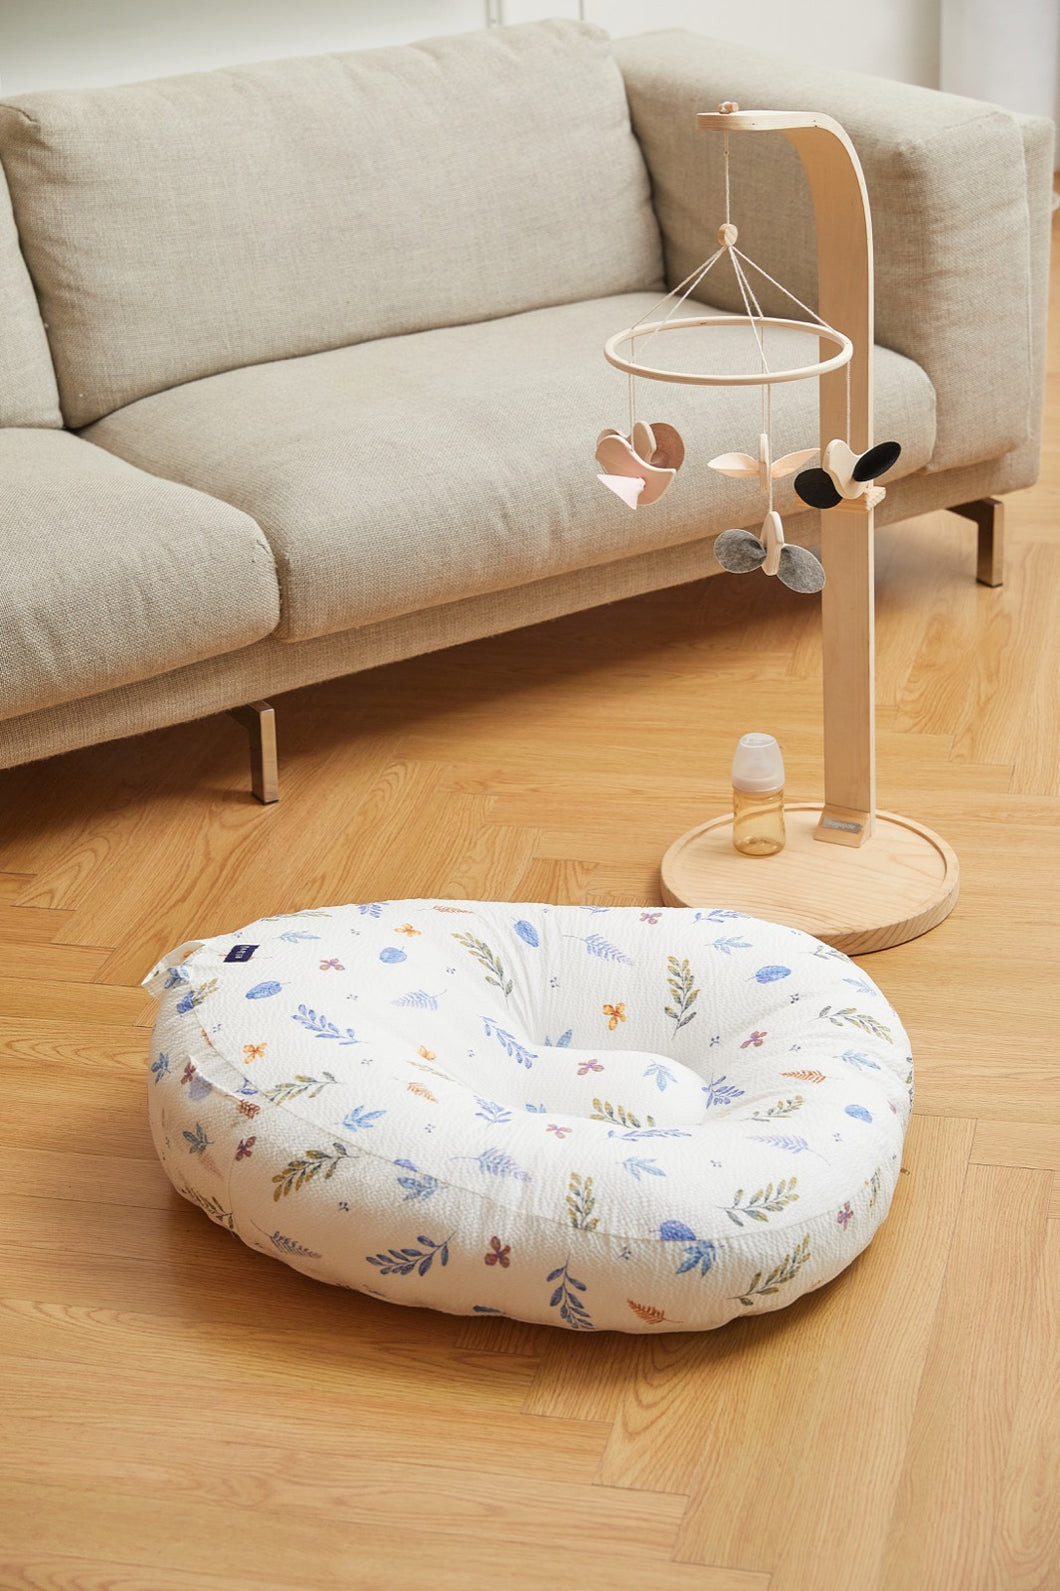 [ Elava ] Baby Reflux Prevention Cushion & Cover Set